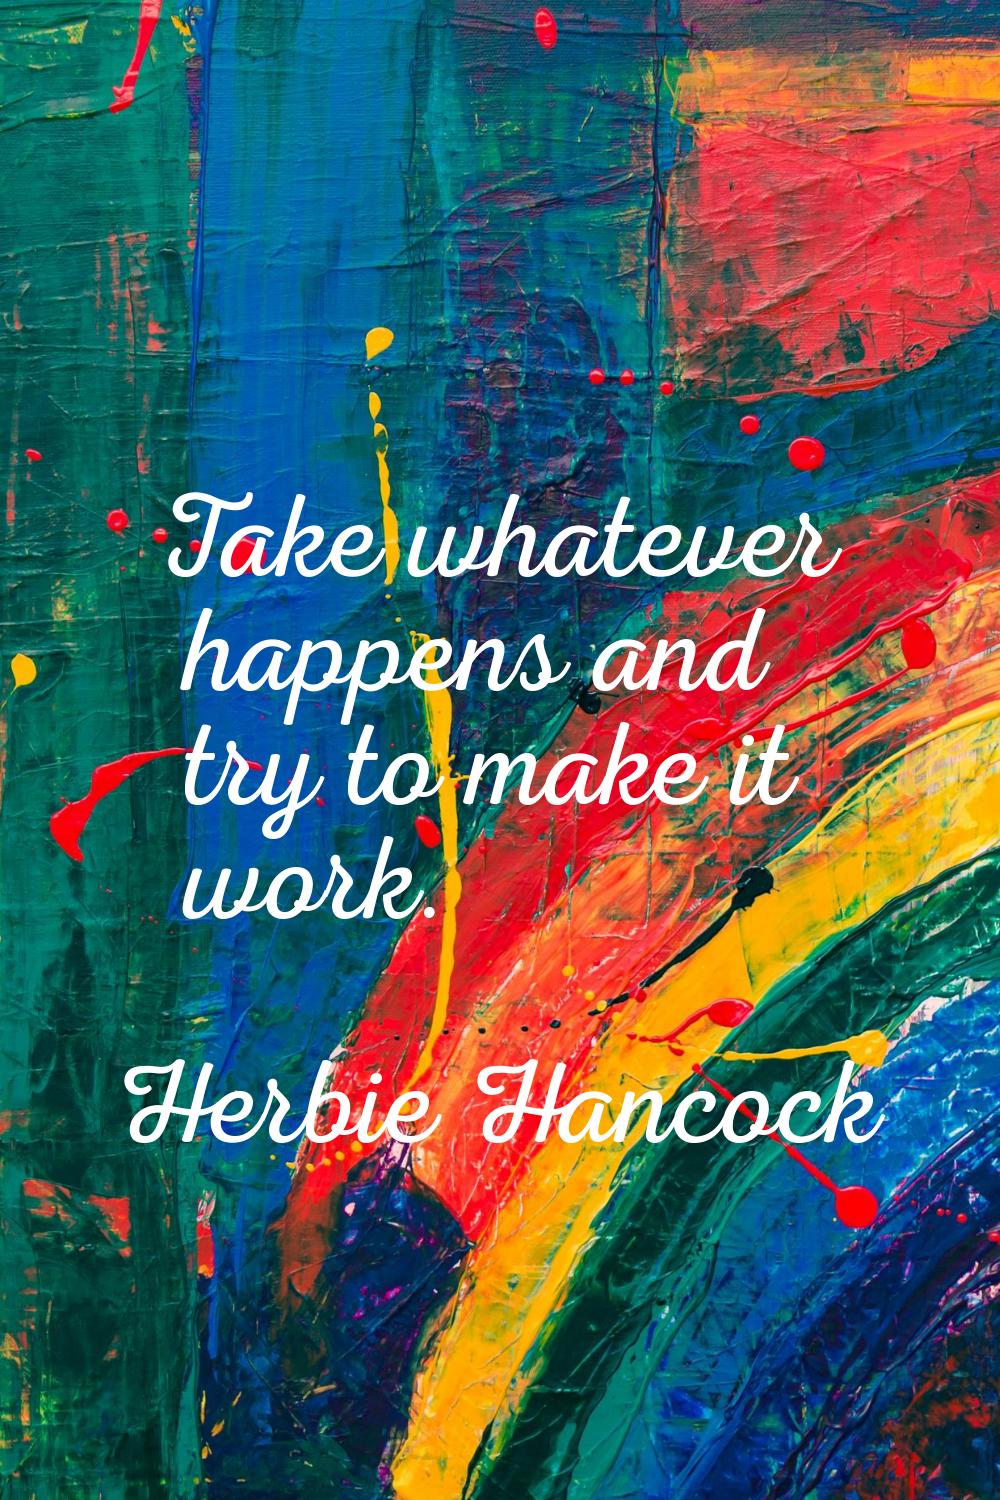 Take whatever happens and try to make it work.